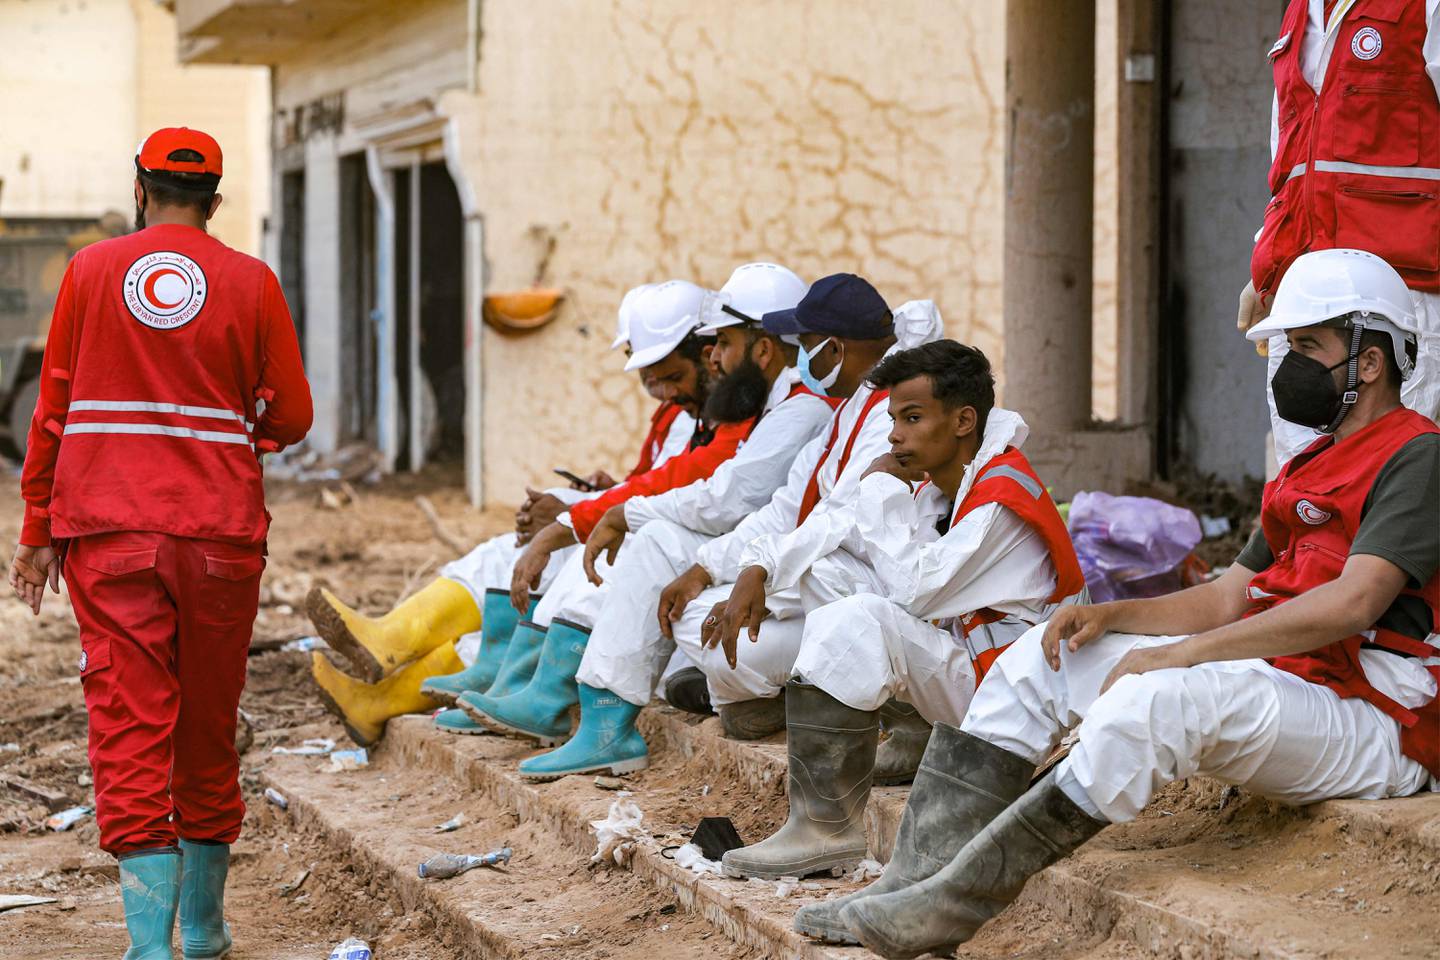 Rescue teams sit in Libya's eastern city of Derna on September 18, 2023, following deadly flash floods.  A week after a tsunami-sized flash flood devastated the Libyan coastal city of Derna, sweeping thousands to their deaths, the international aid effort to help the grieving survivors slowly gathered pace.  The enormous flood, fueled by torrential rains on September 10, had broken through two upstream dams and sent a giant wave crashing down the previously dry river bed, or wadi, that bisects the city of about 100,000 people.  (Photo by Mahmud Turkey / AFP)